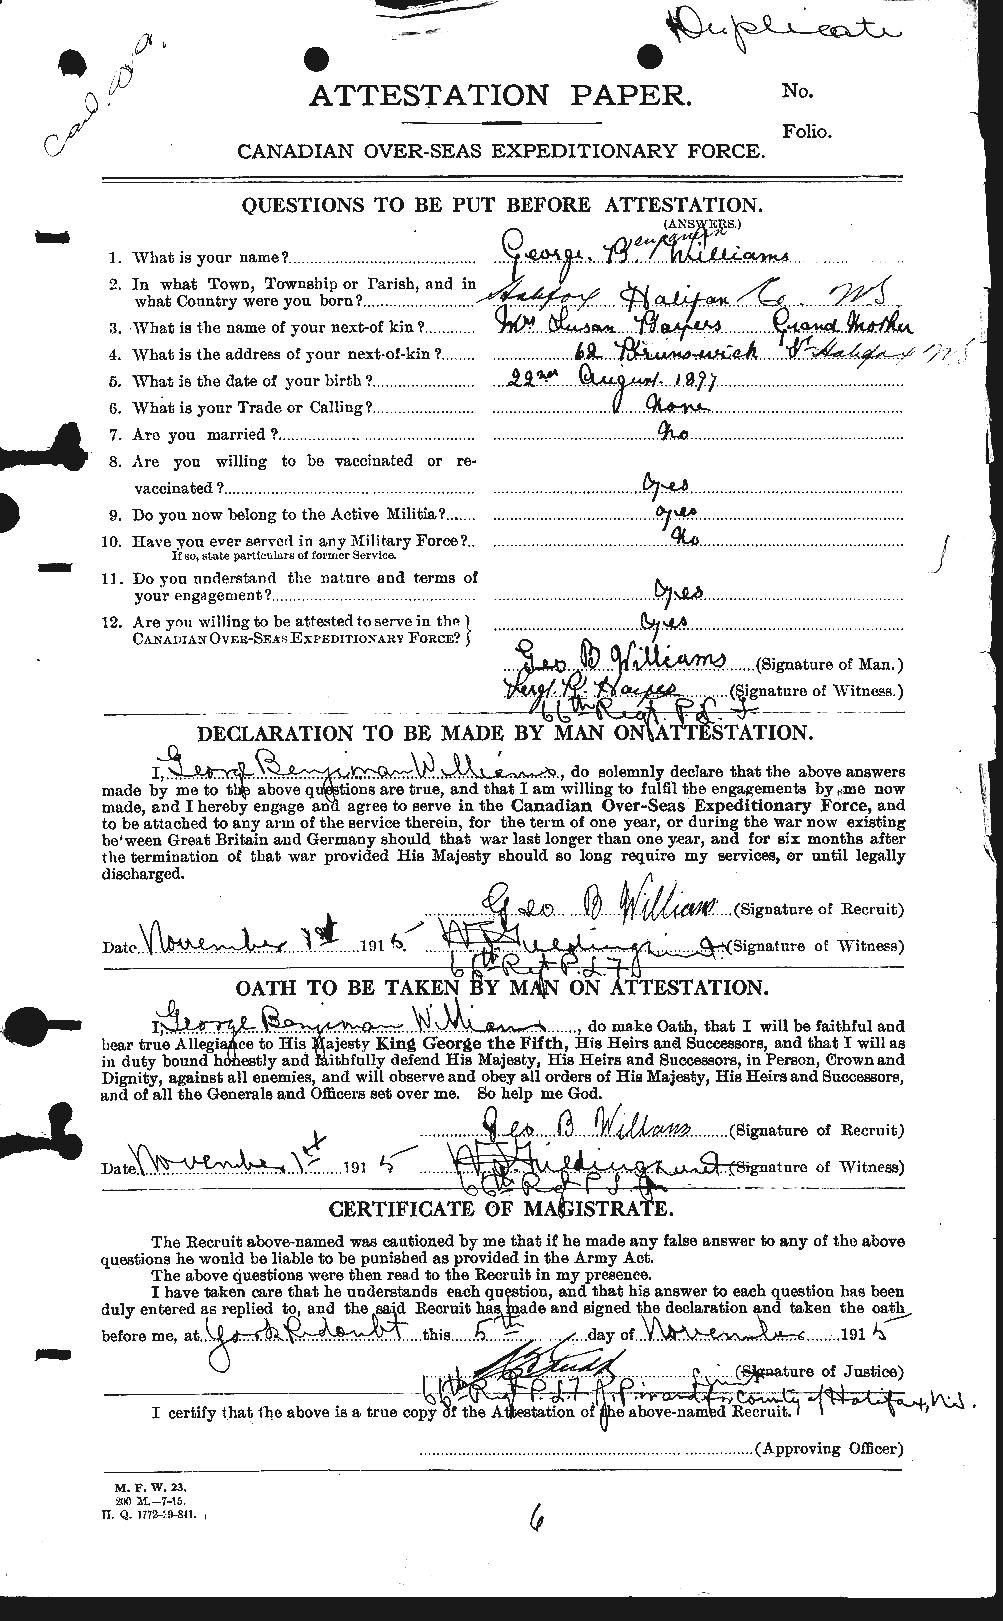 Personnel Records of the First World War - CEF 676029a